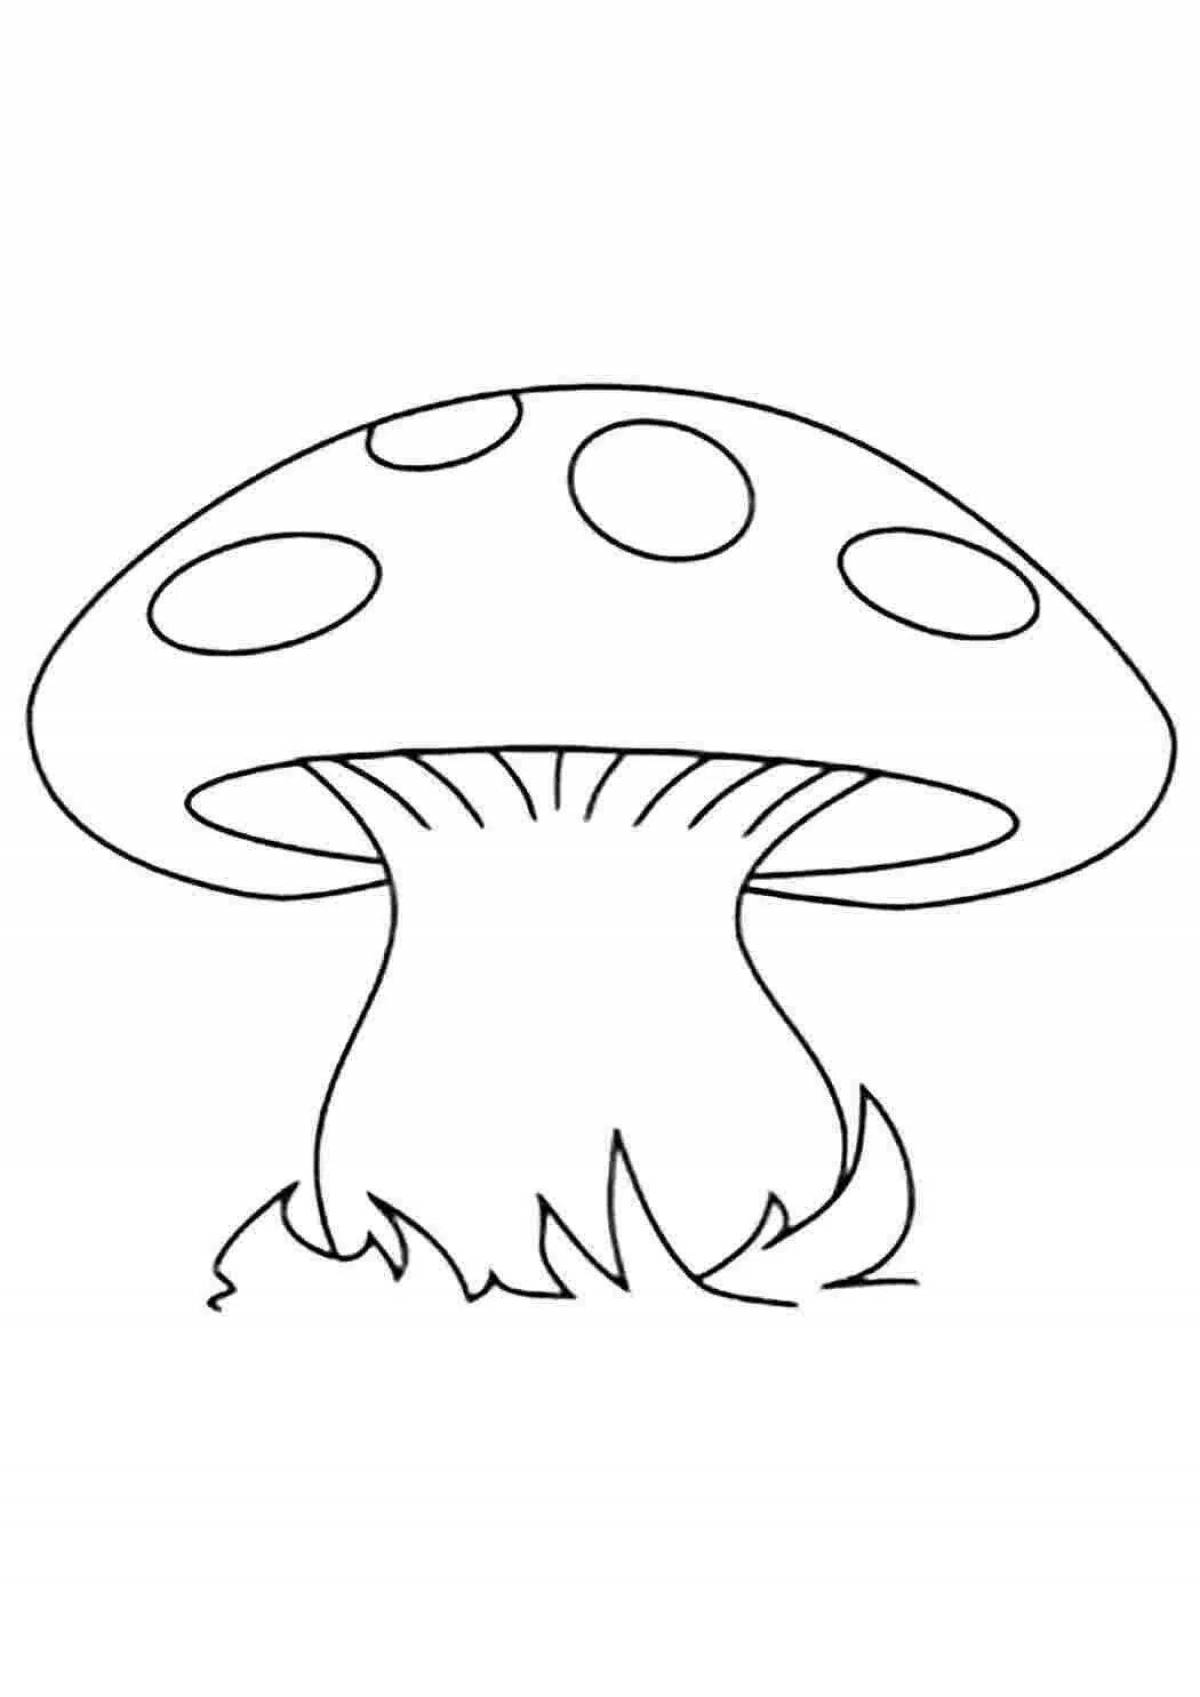 Coloring book magical fly agaric